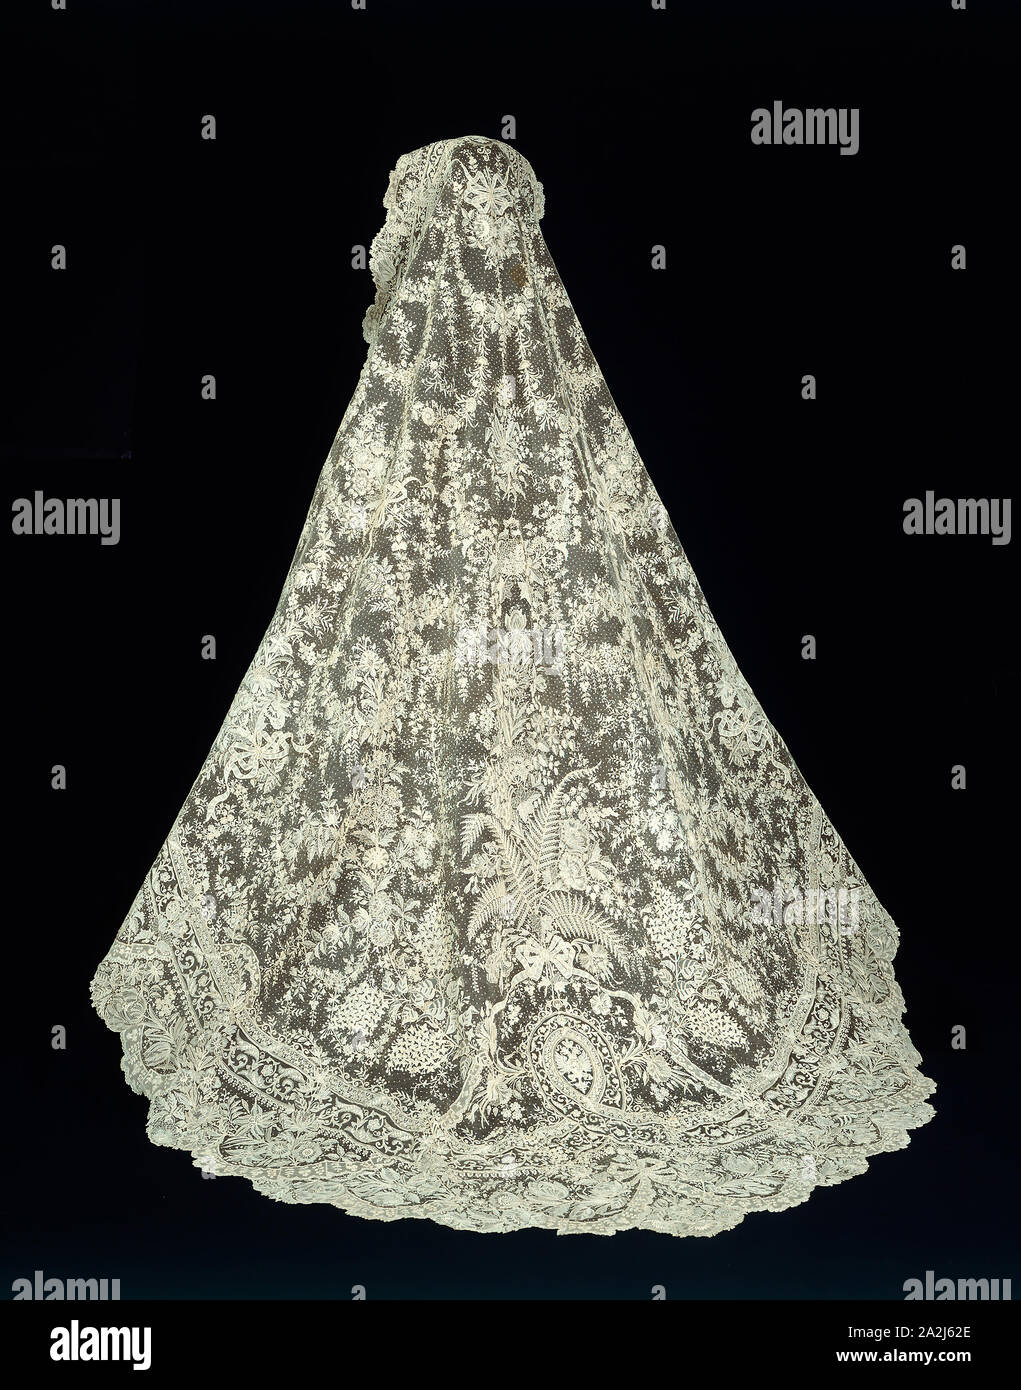 Veil with Russian Imperial Family Coat of Arms, 1875/1900, Belgium, Belgium, Cotton, needle lace of a type known as 'Point de Gaze Stock Photo